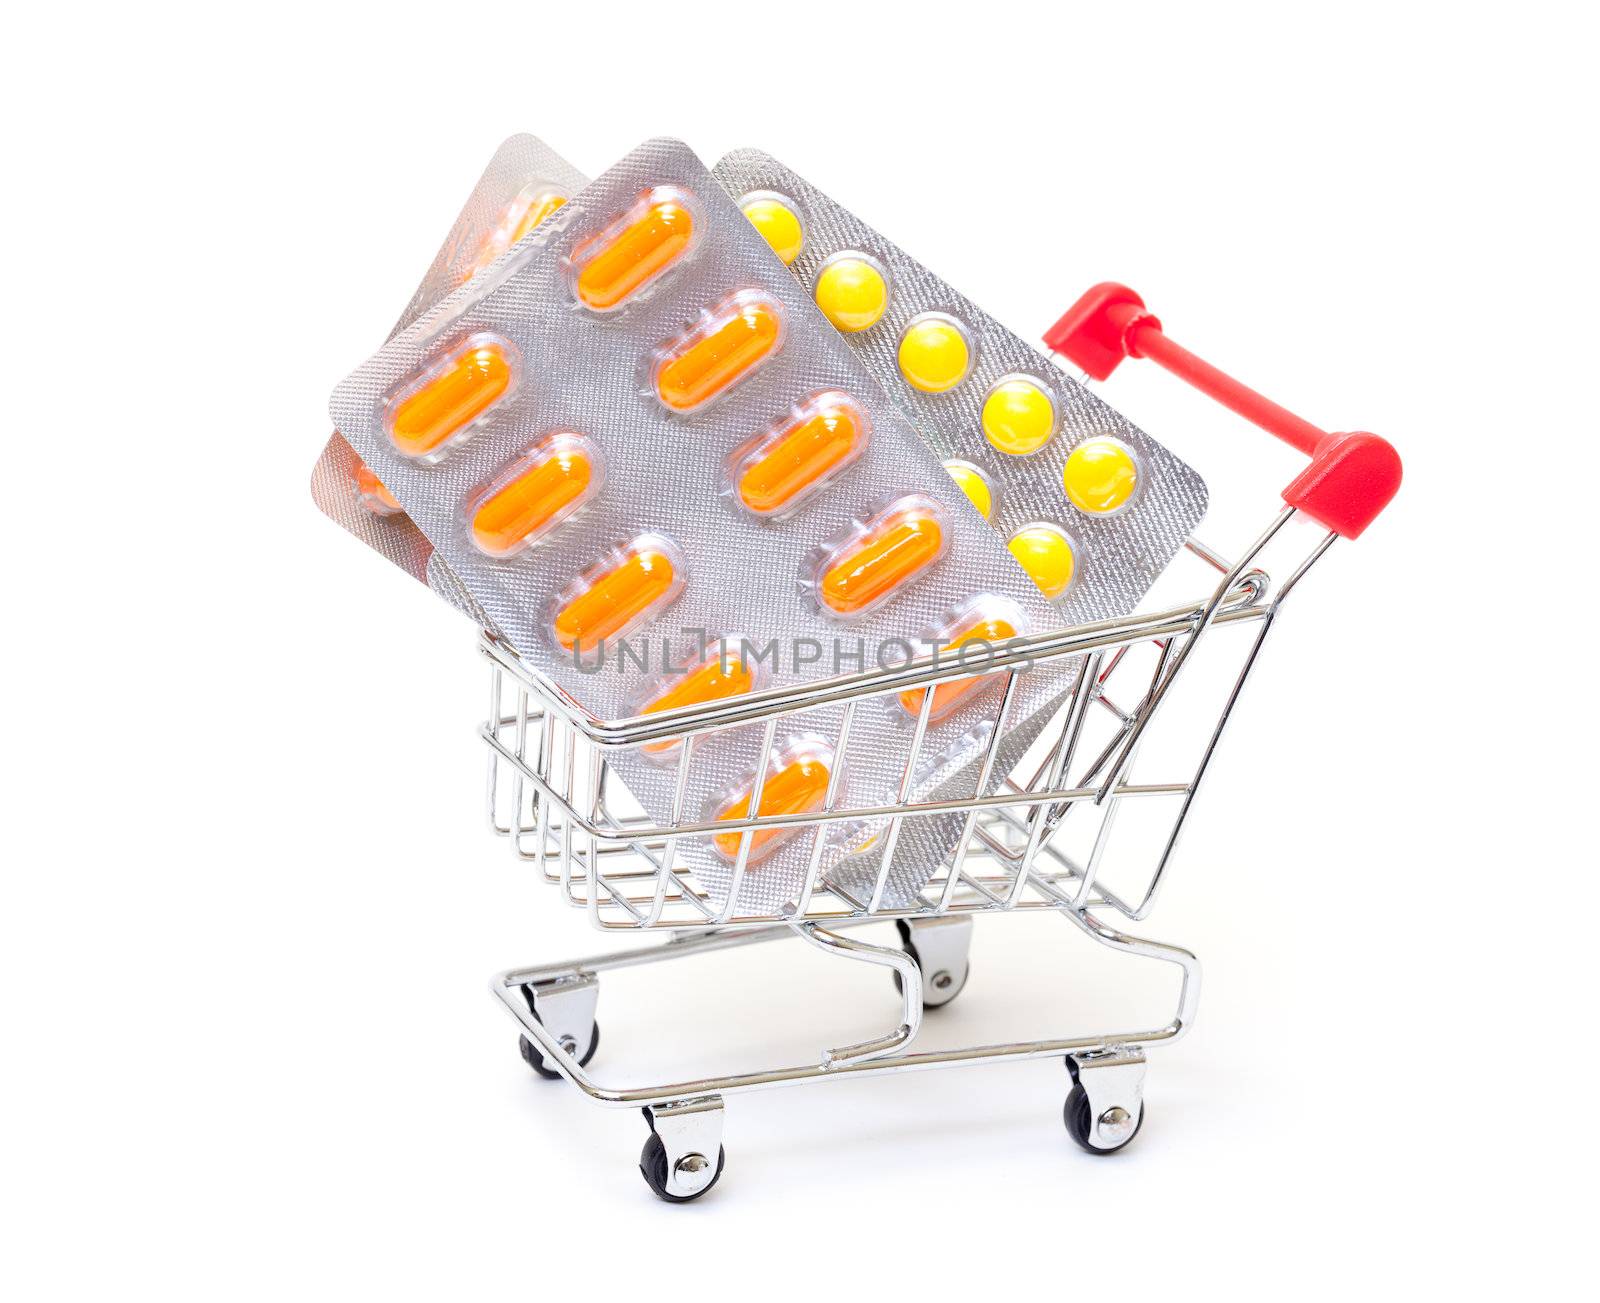 Multicolored pills packs in shopping cart by Discovod